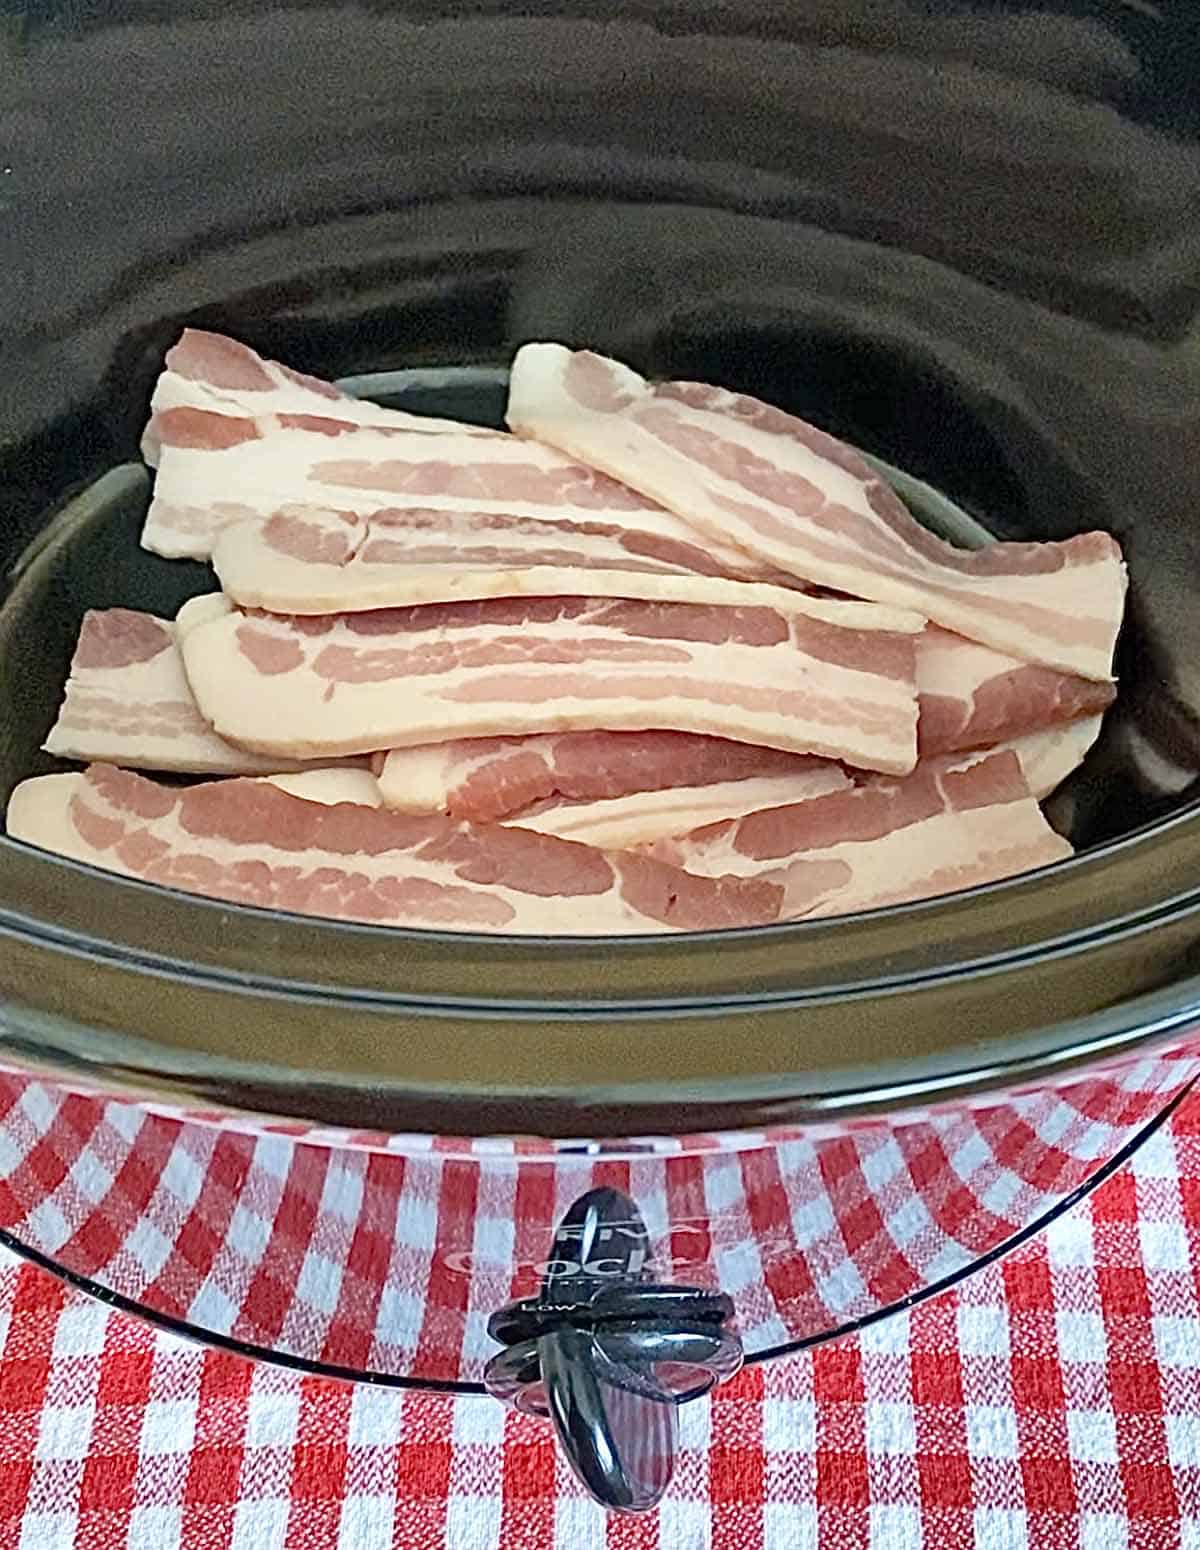 8 halved slices of bacon in the bottom of a black slow cooker appliance.